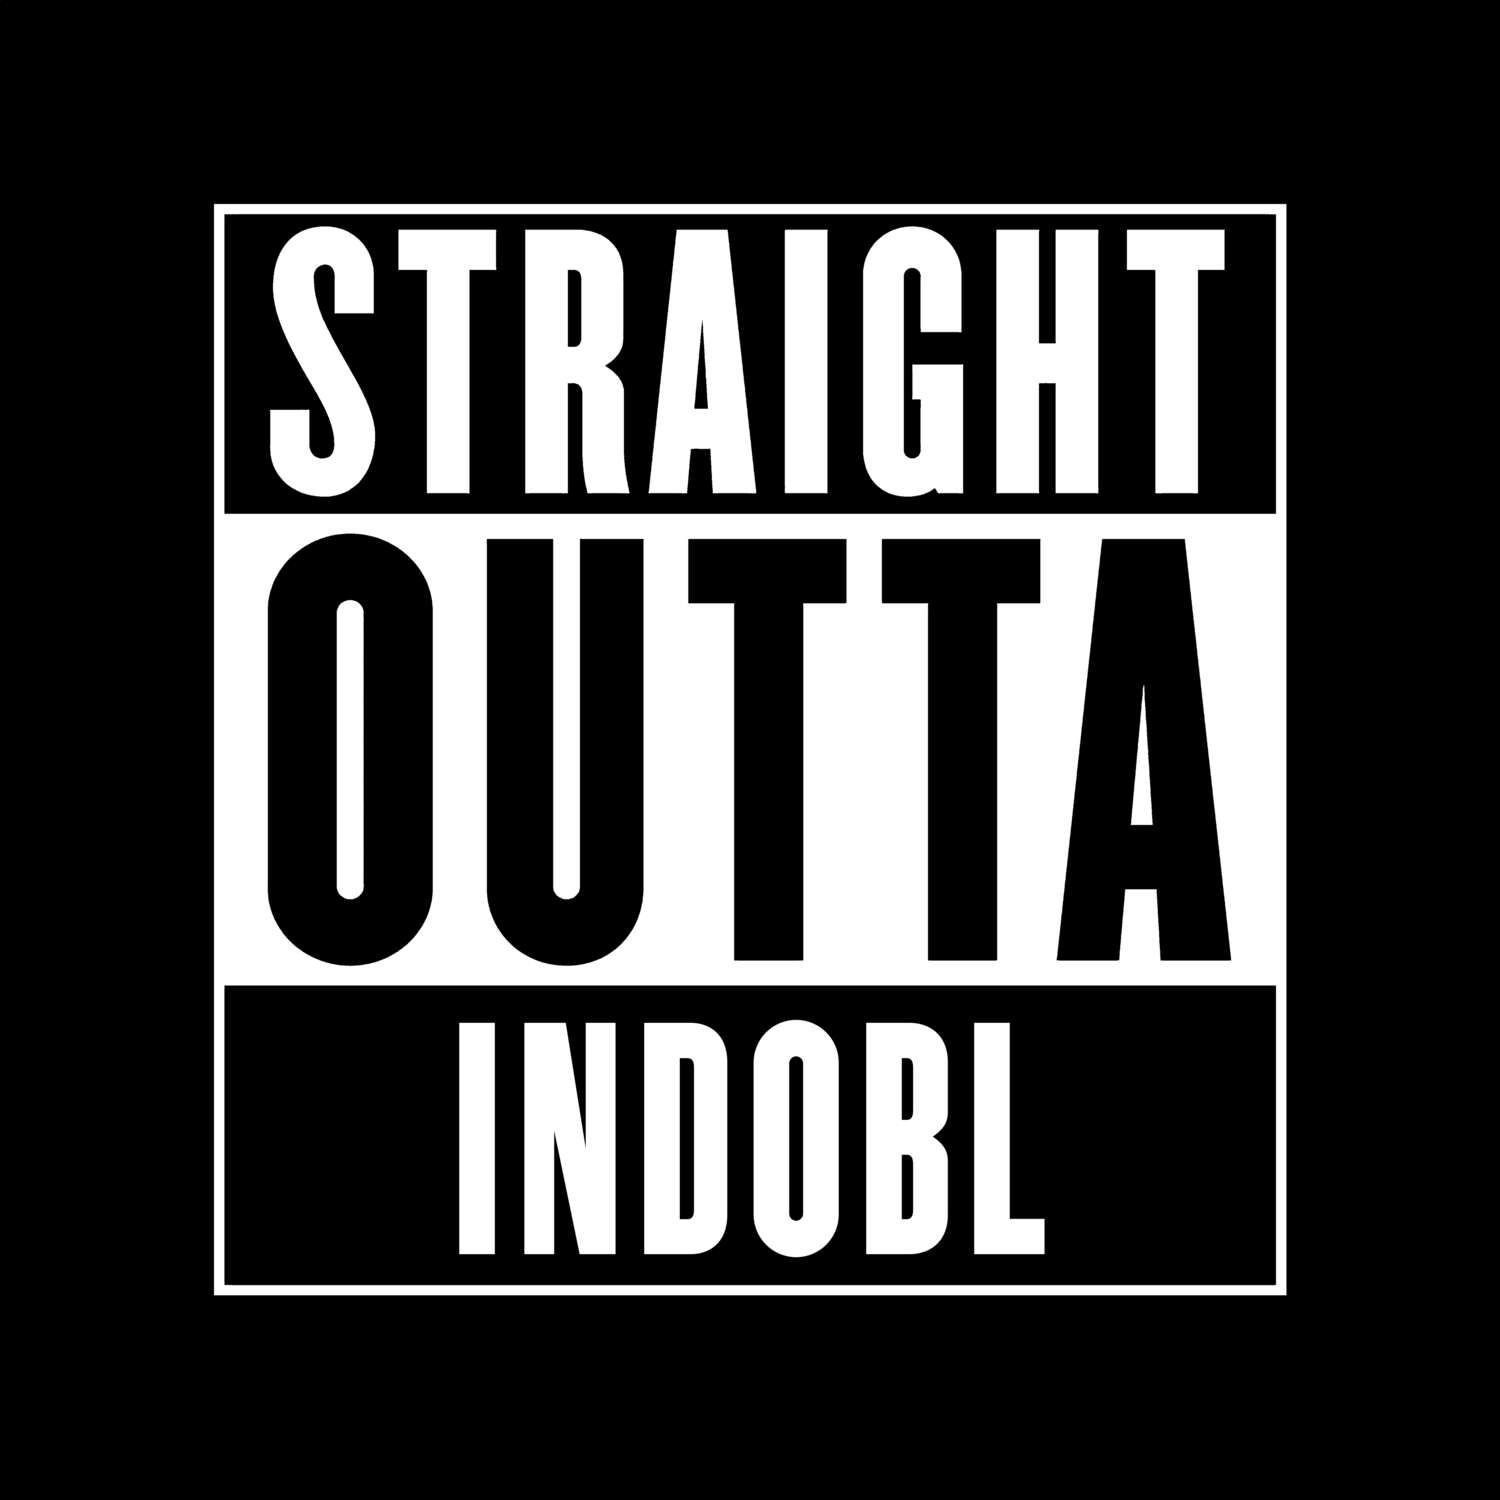 Indobl T-Shirt »Straight Outta«